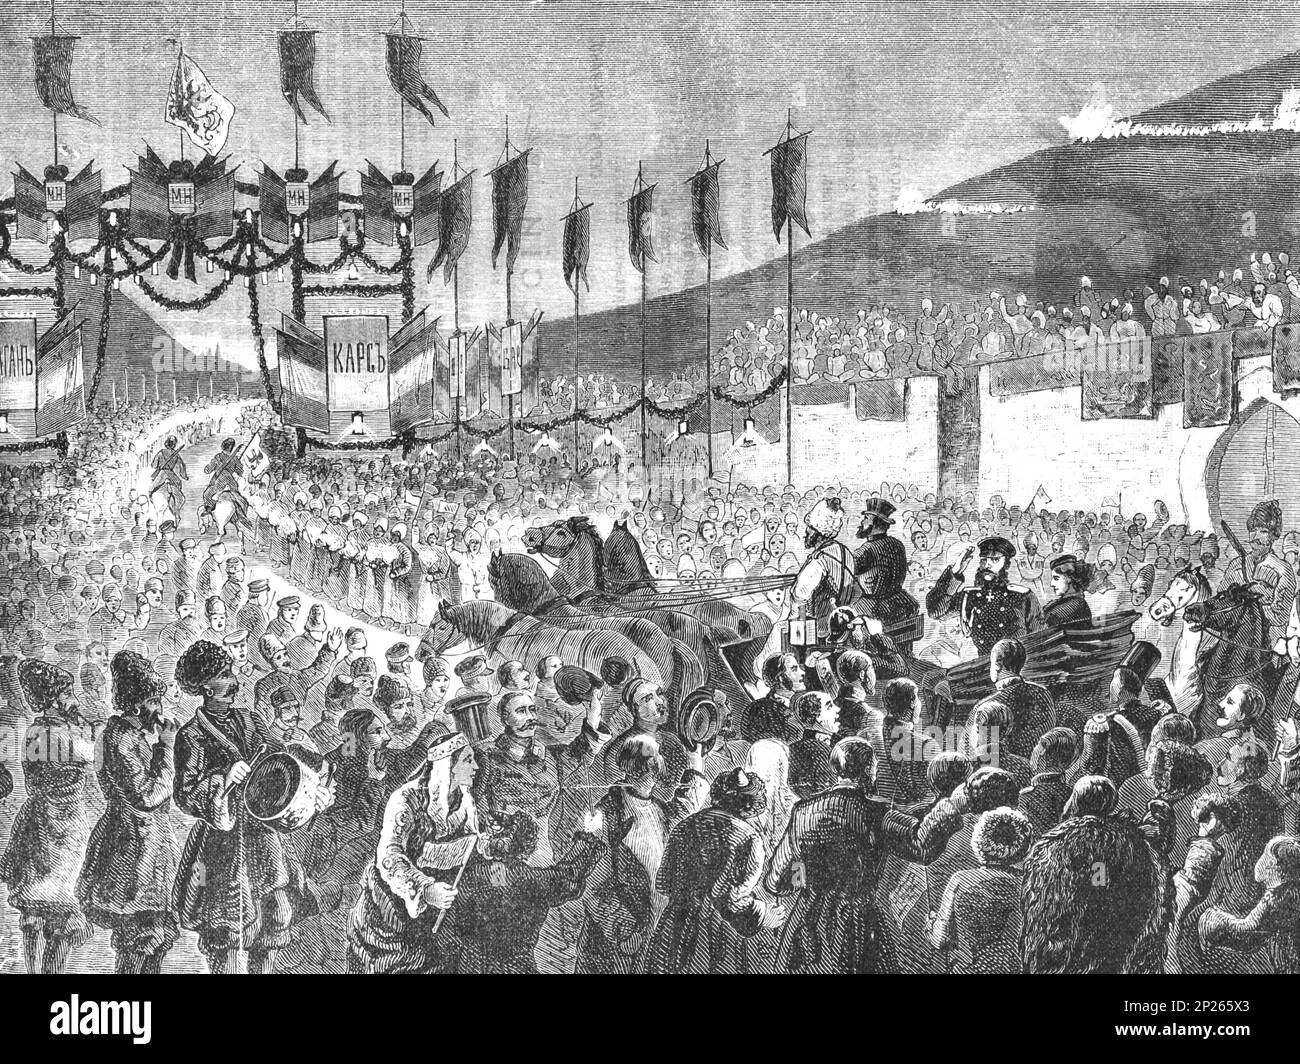 Solemn entry of the Grand Duke Michael Mikhailovich in Tiflis (Tbilisi) after the capture of Kars. Early 20th century illustration. Stock Photo